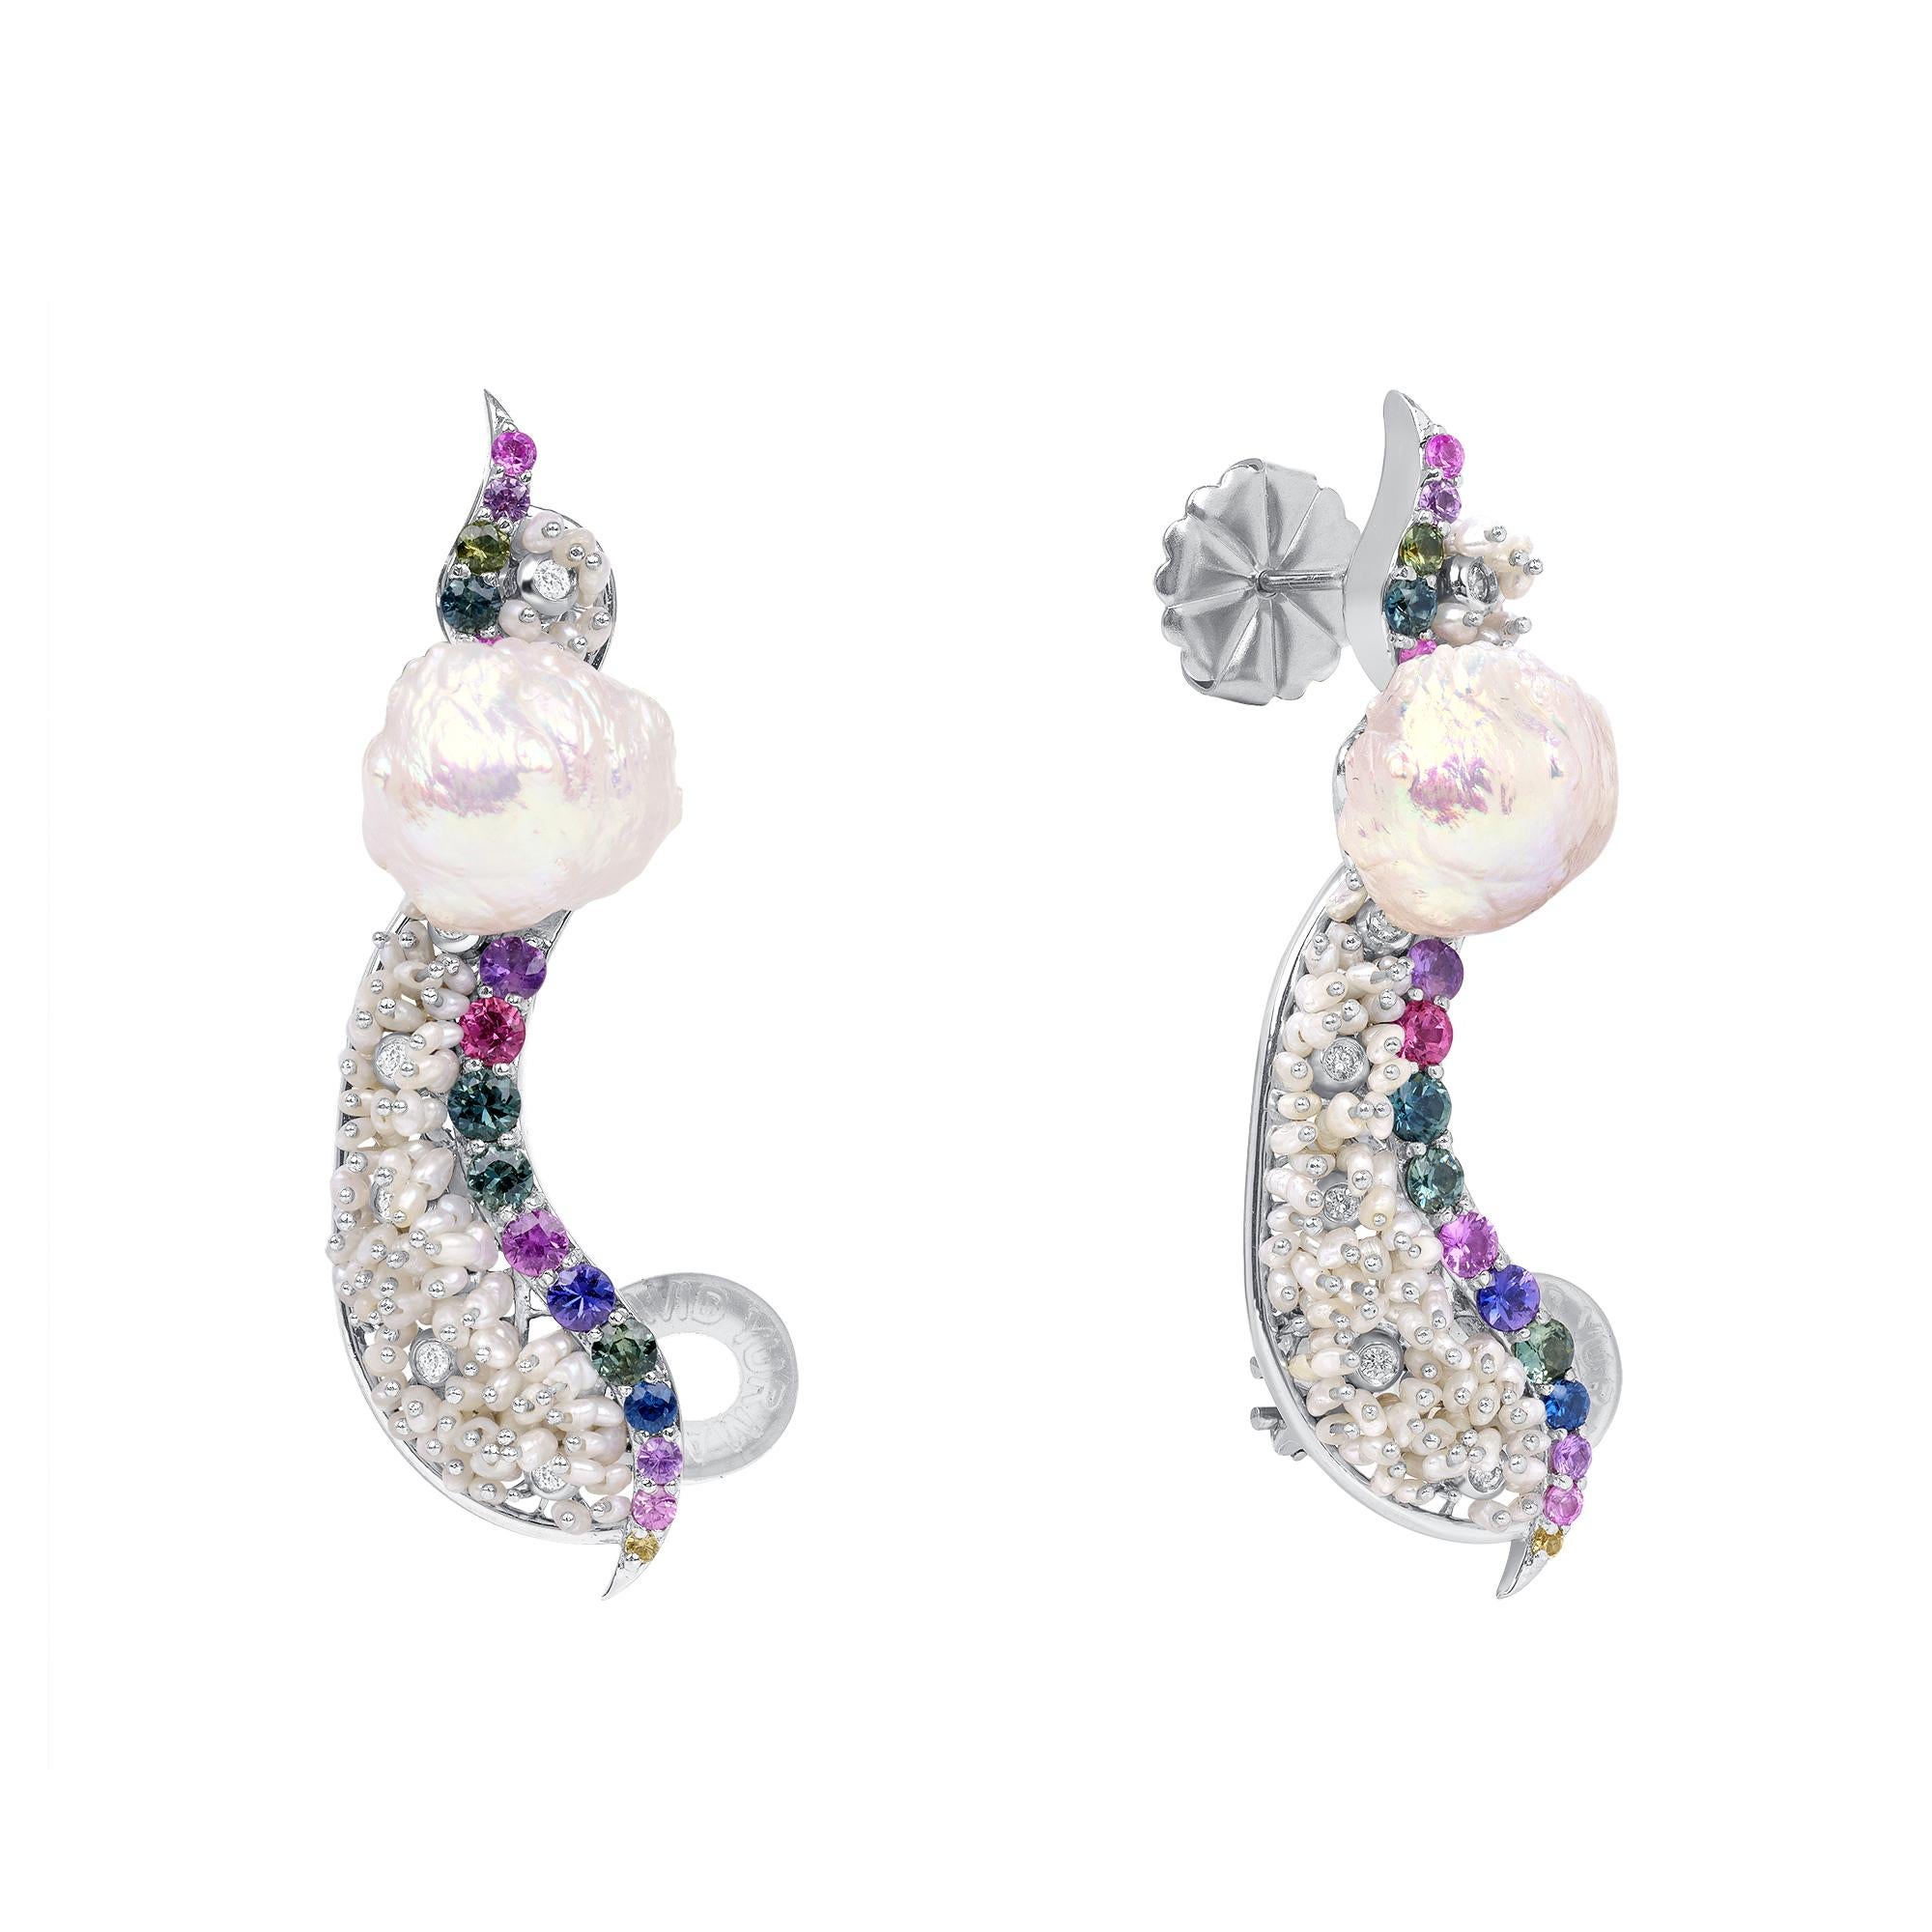 These dissimilar ear cuffs feature 18.5 carats of cultured freshwater rosebud pearls and 2.9 carats of cultured Akoya Pearls set in platinum. They also feature 1.71 carats of multicolor AAA round sapphires, and 0.06 carats of SI-1, G-H, round